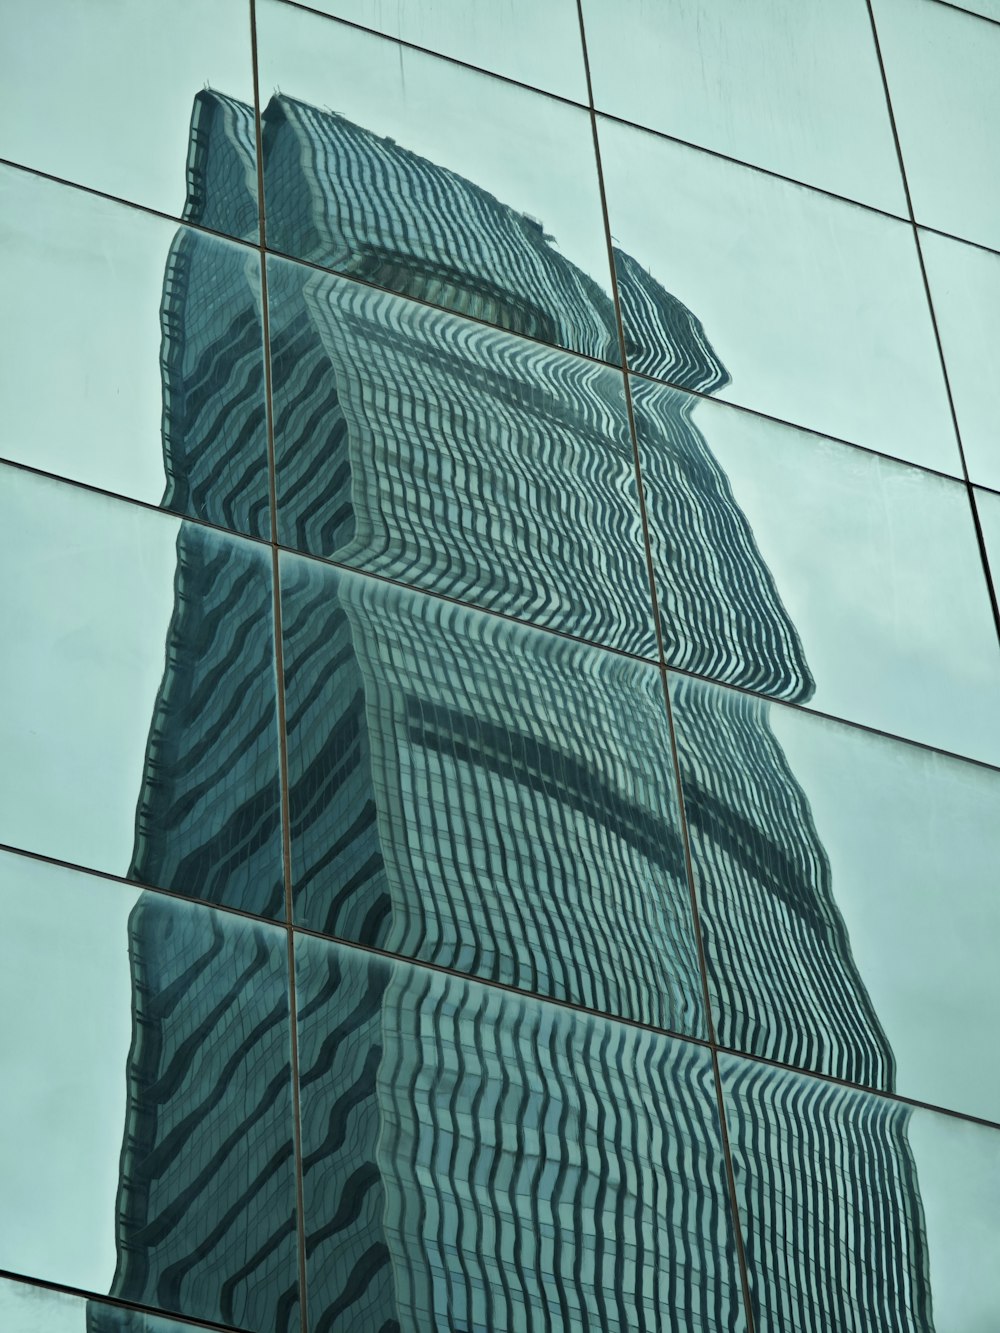 the reflection of a building in the glass of another building